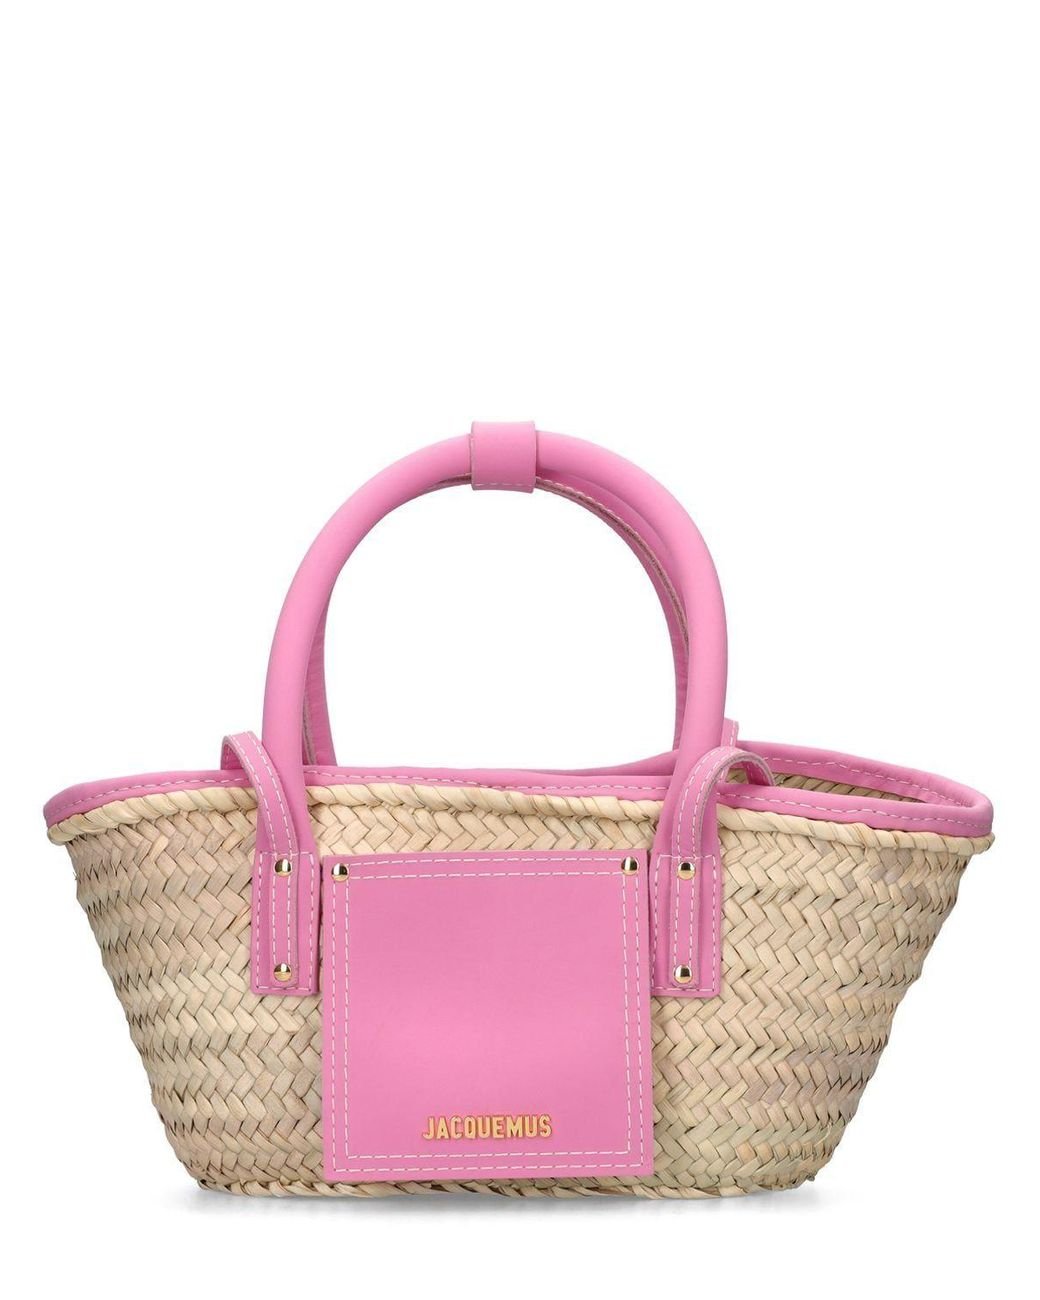 Jacquemus Le Petit Panier Soli Straw & Leather Bag in Pink | Lyst